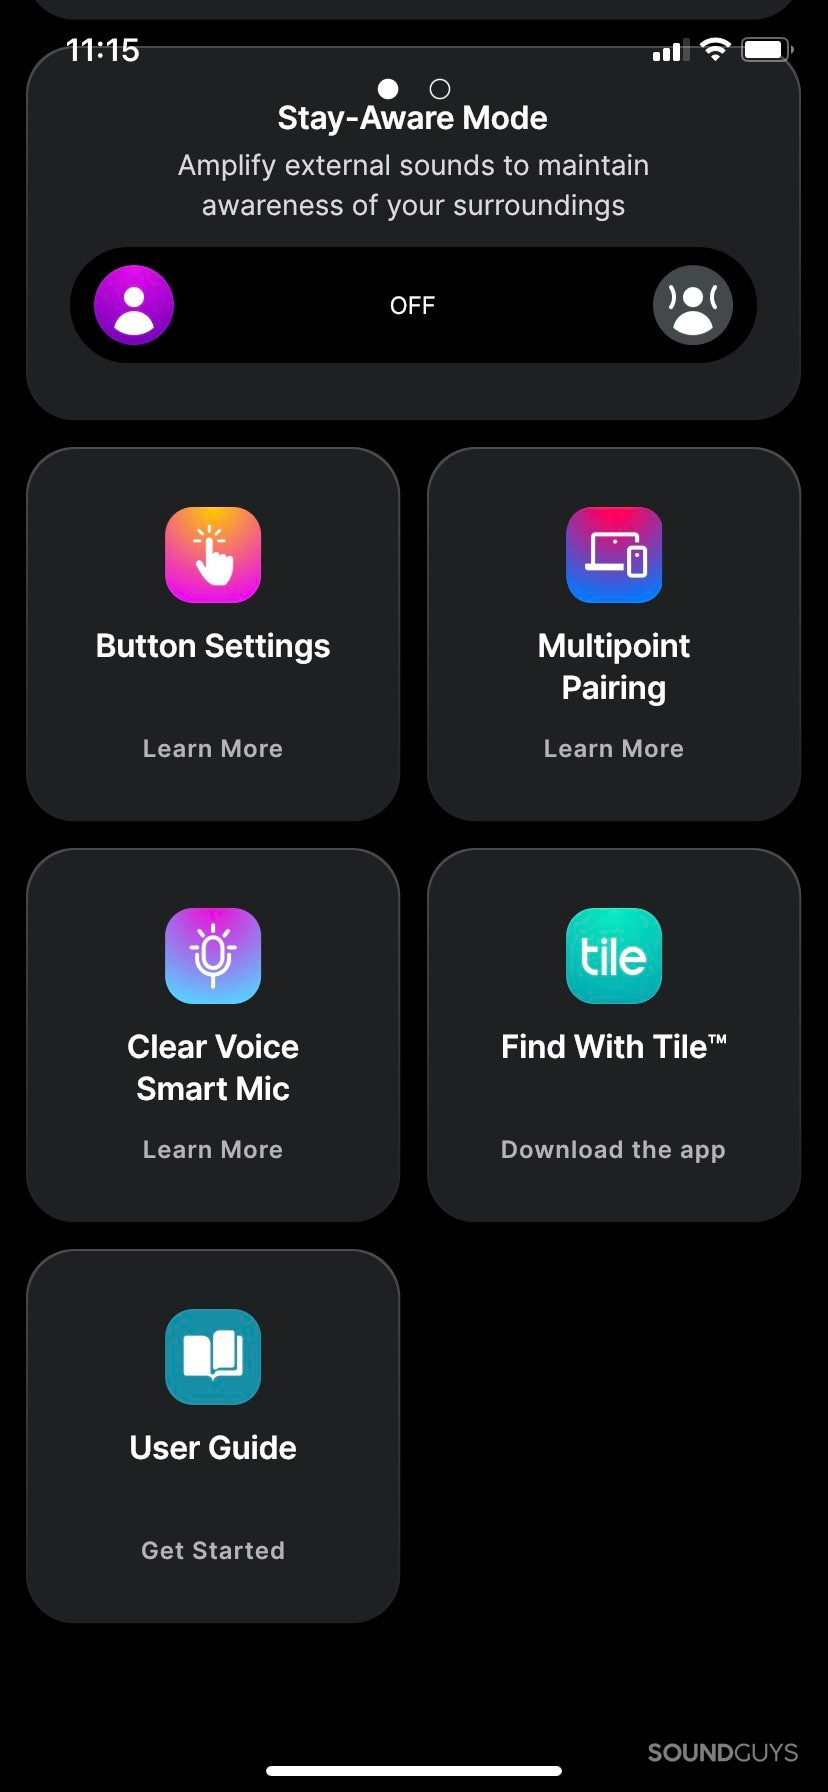 A screenshot of the Skullcandy app, showing the stay aware button, and widgets with more information on button settings, multipoint, and Tile.